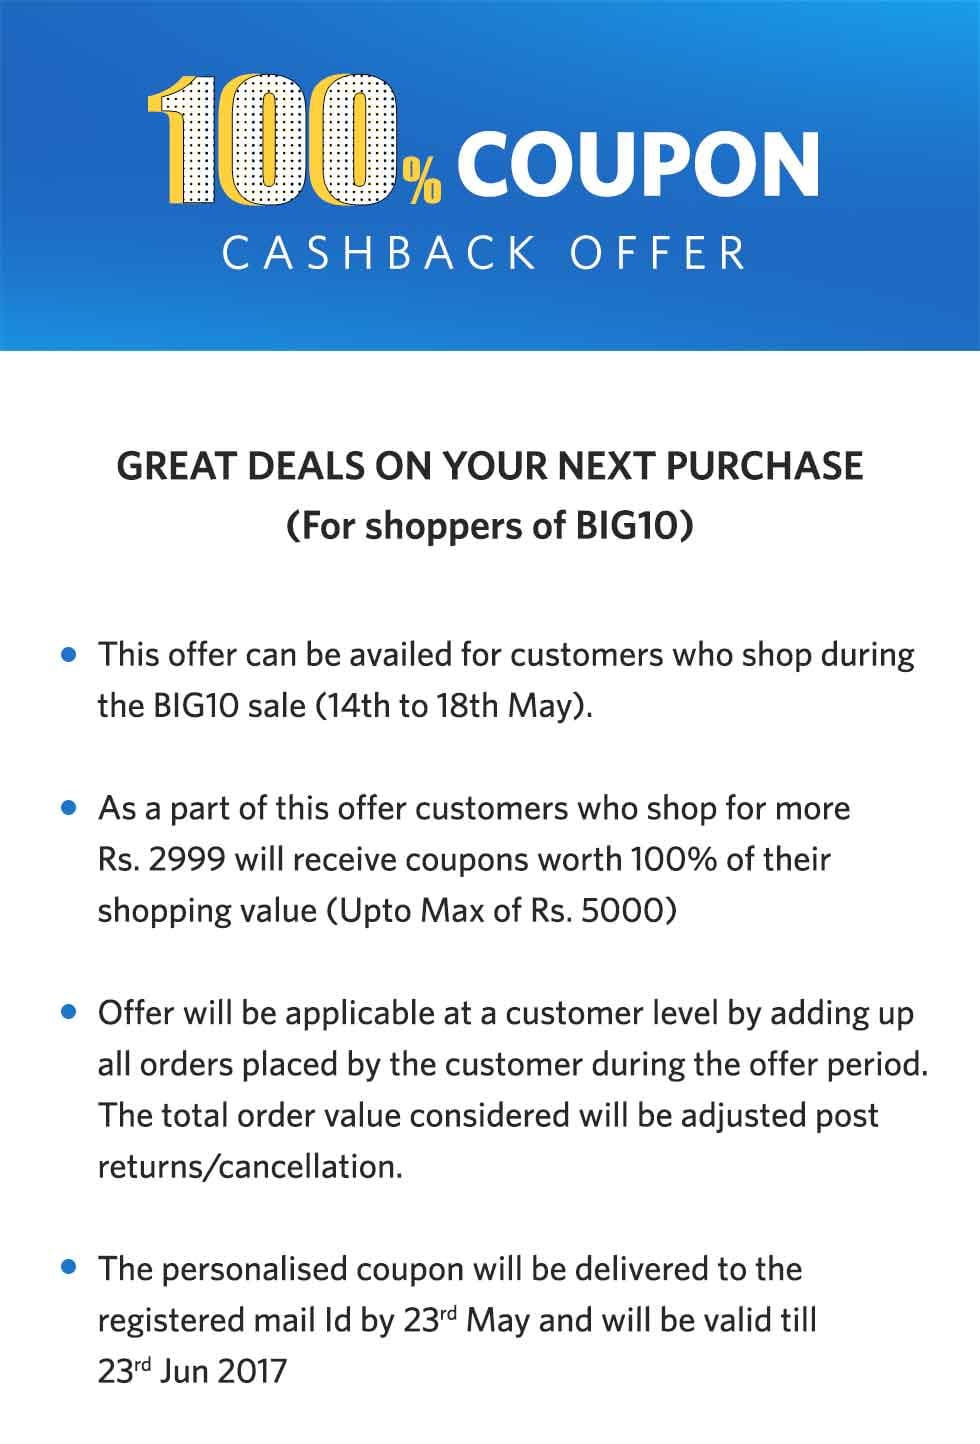 Get 100% cashback when Shop for Rs.2999 (14th to 18th May) at Myntra